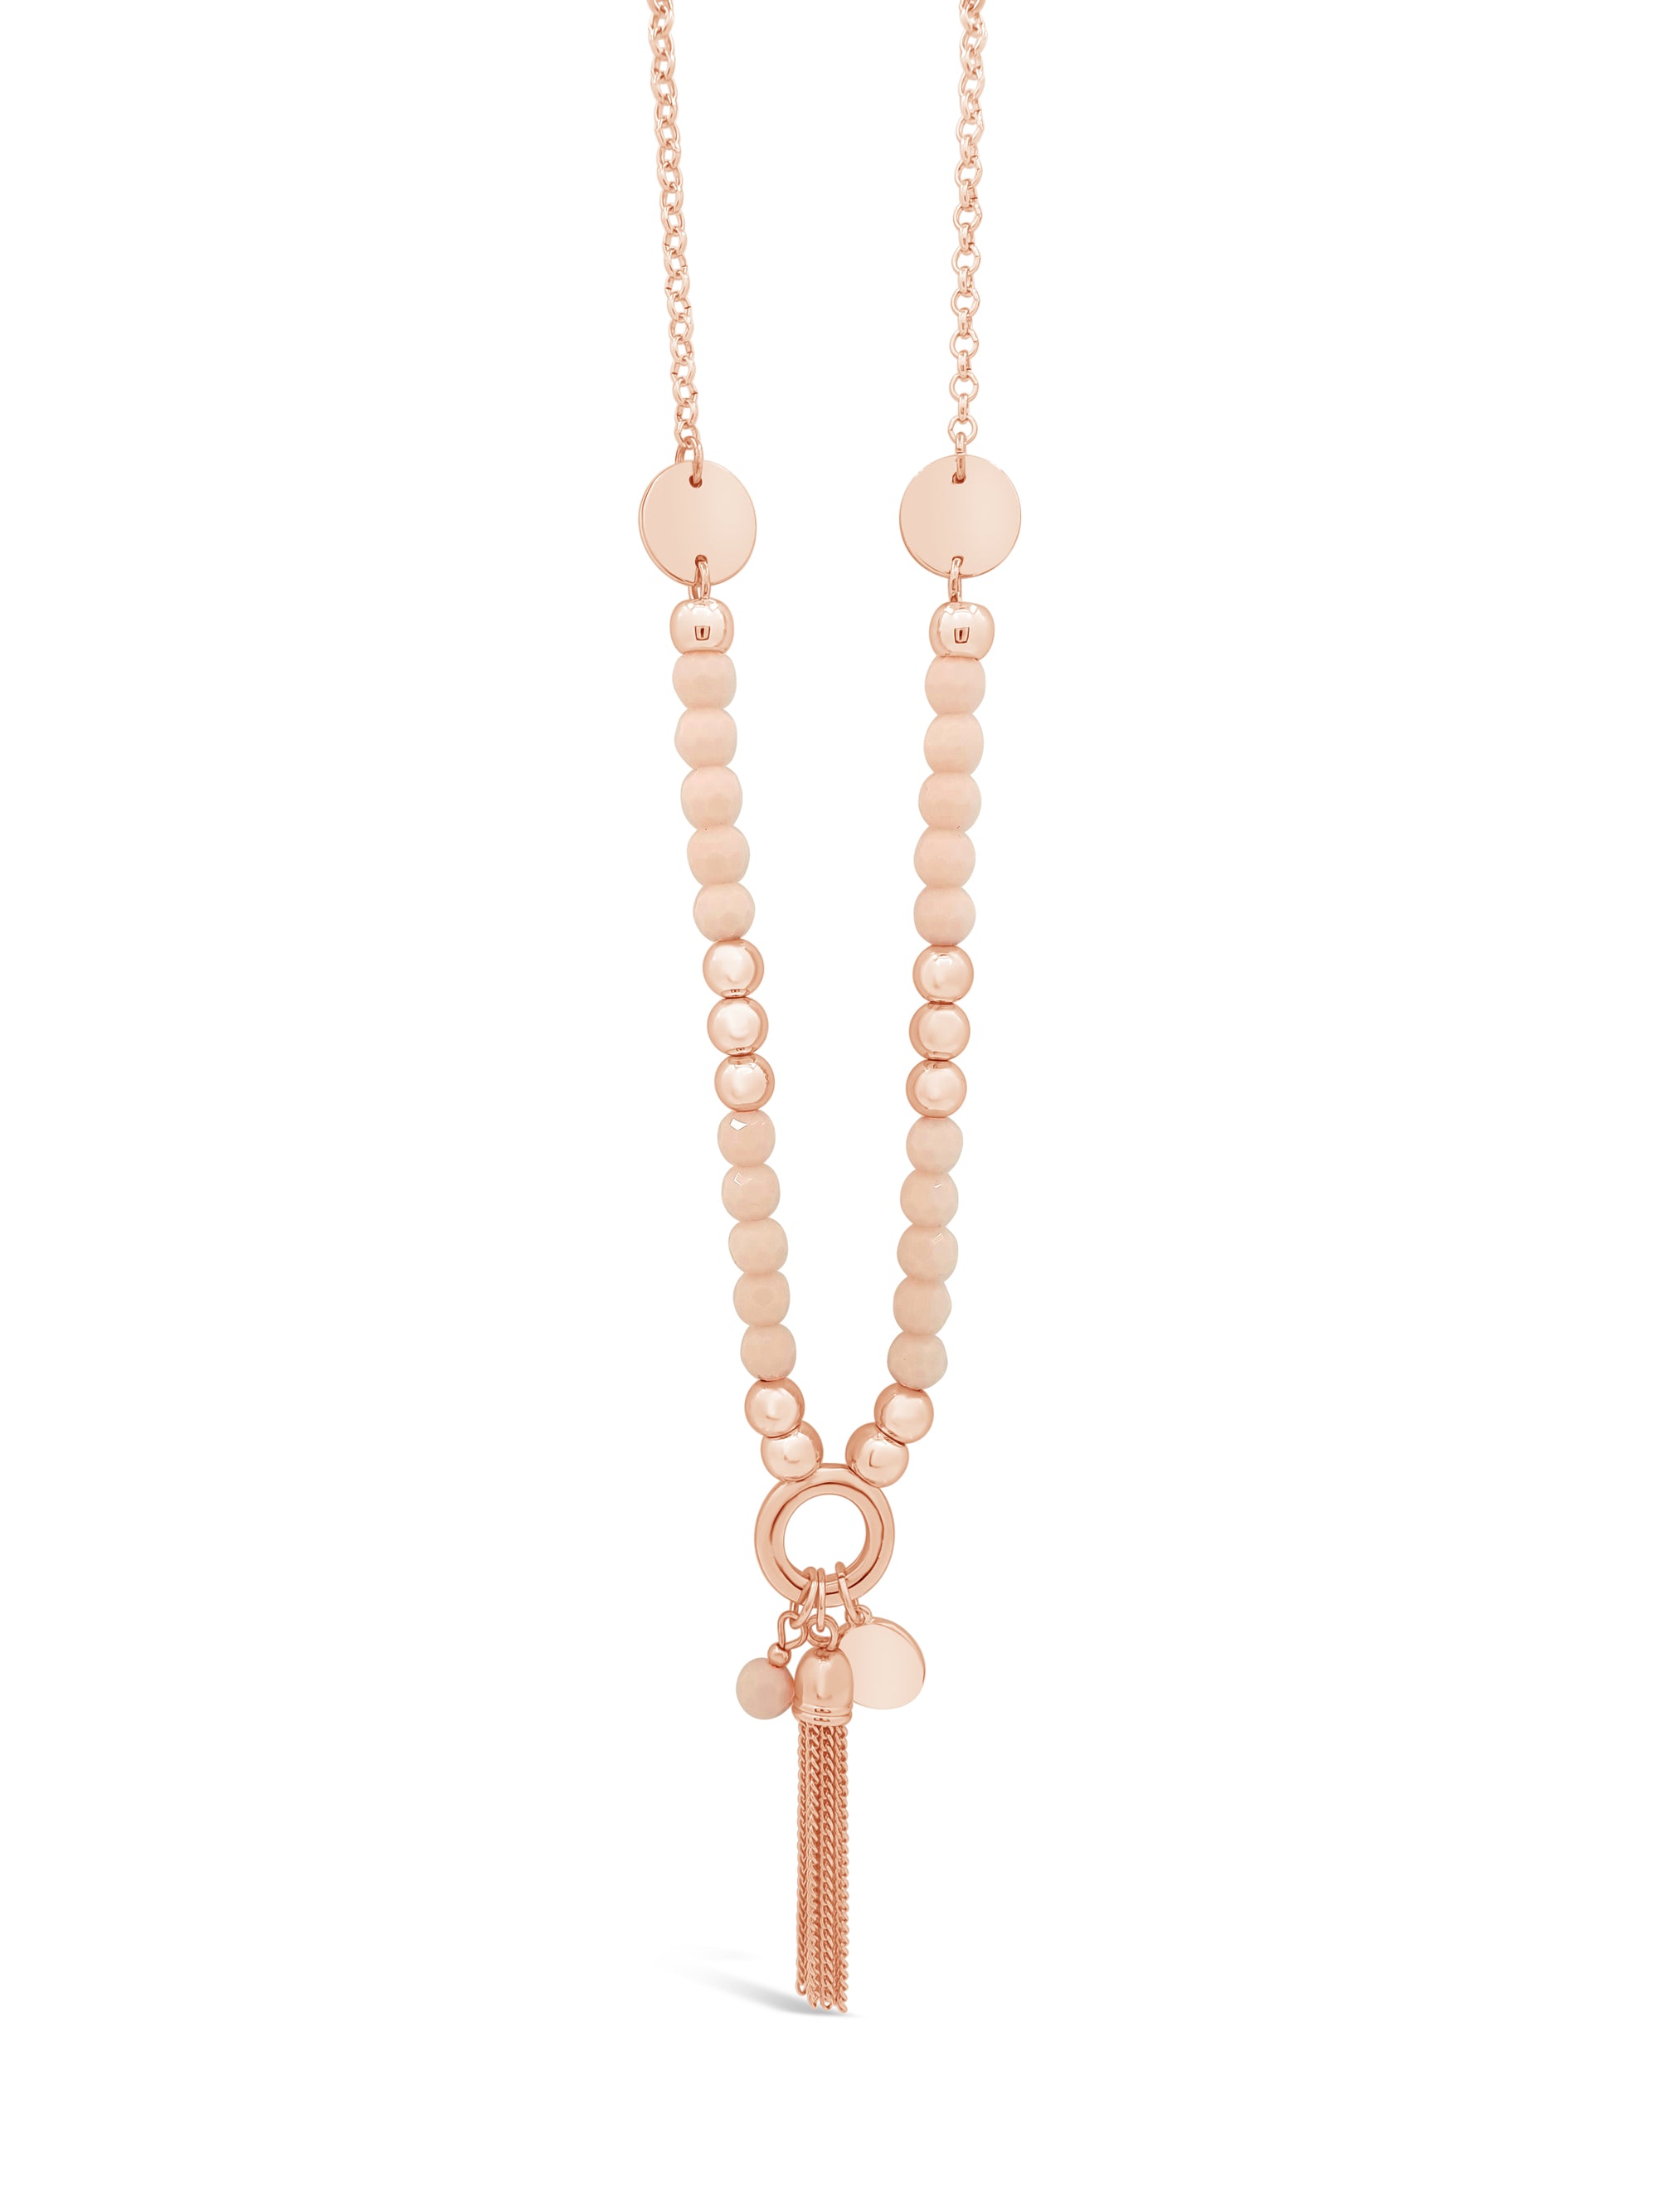 Absolute Jewellery Necklace Rose Gold 30"